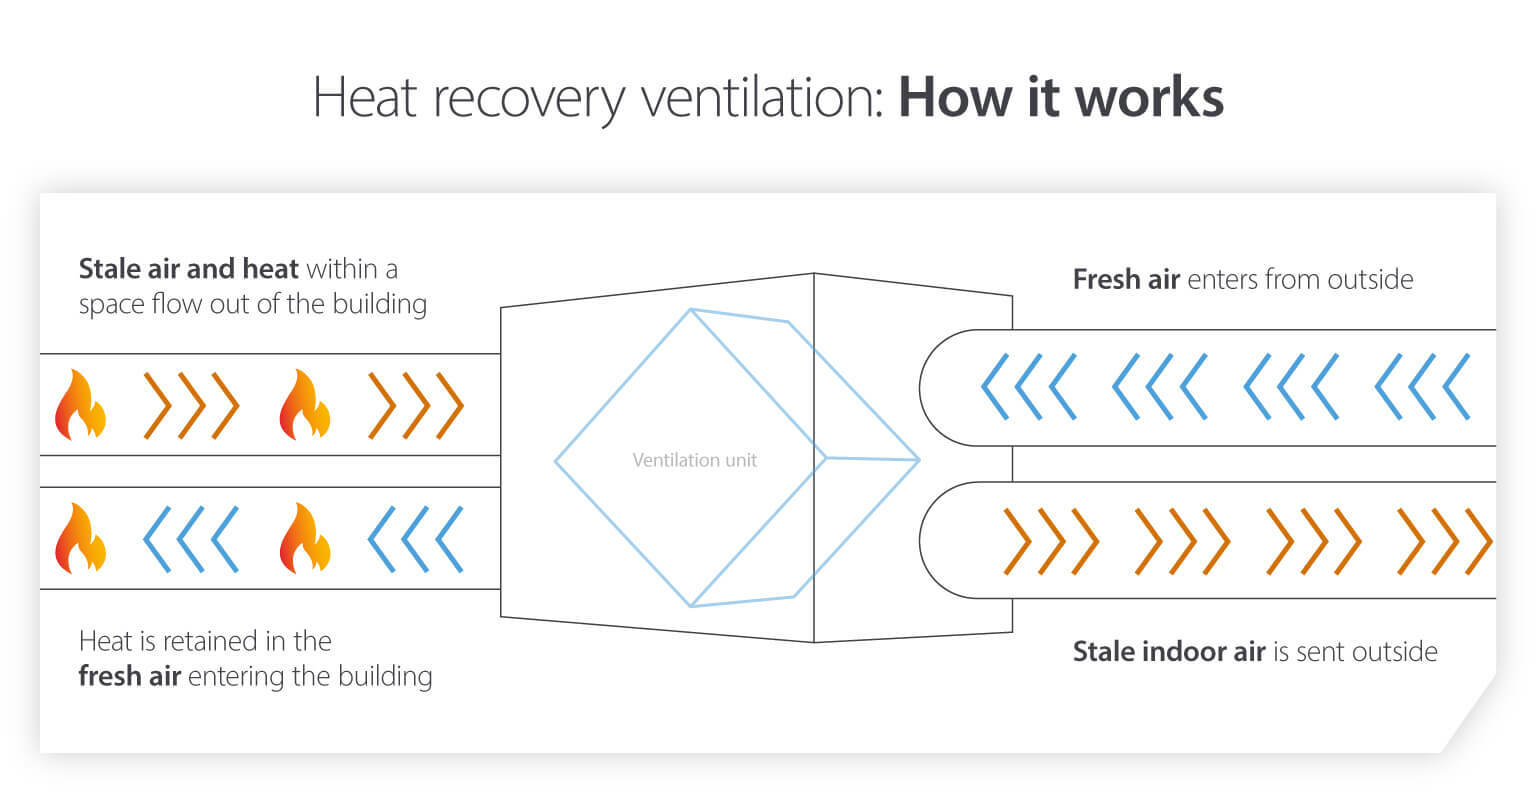 How heat recovery ventilation works